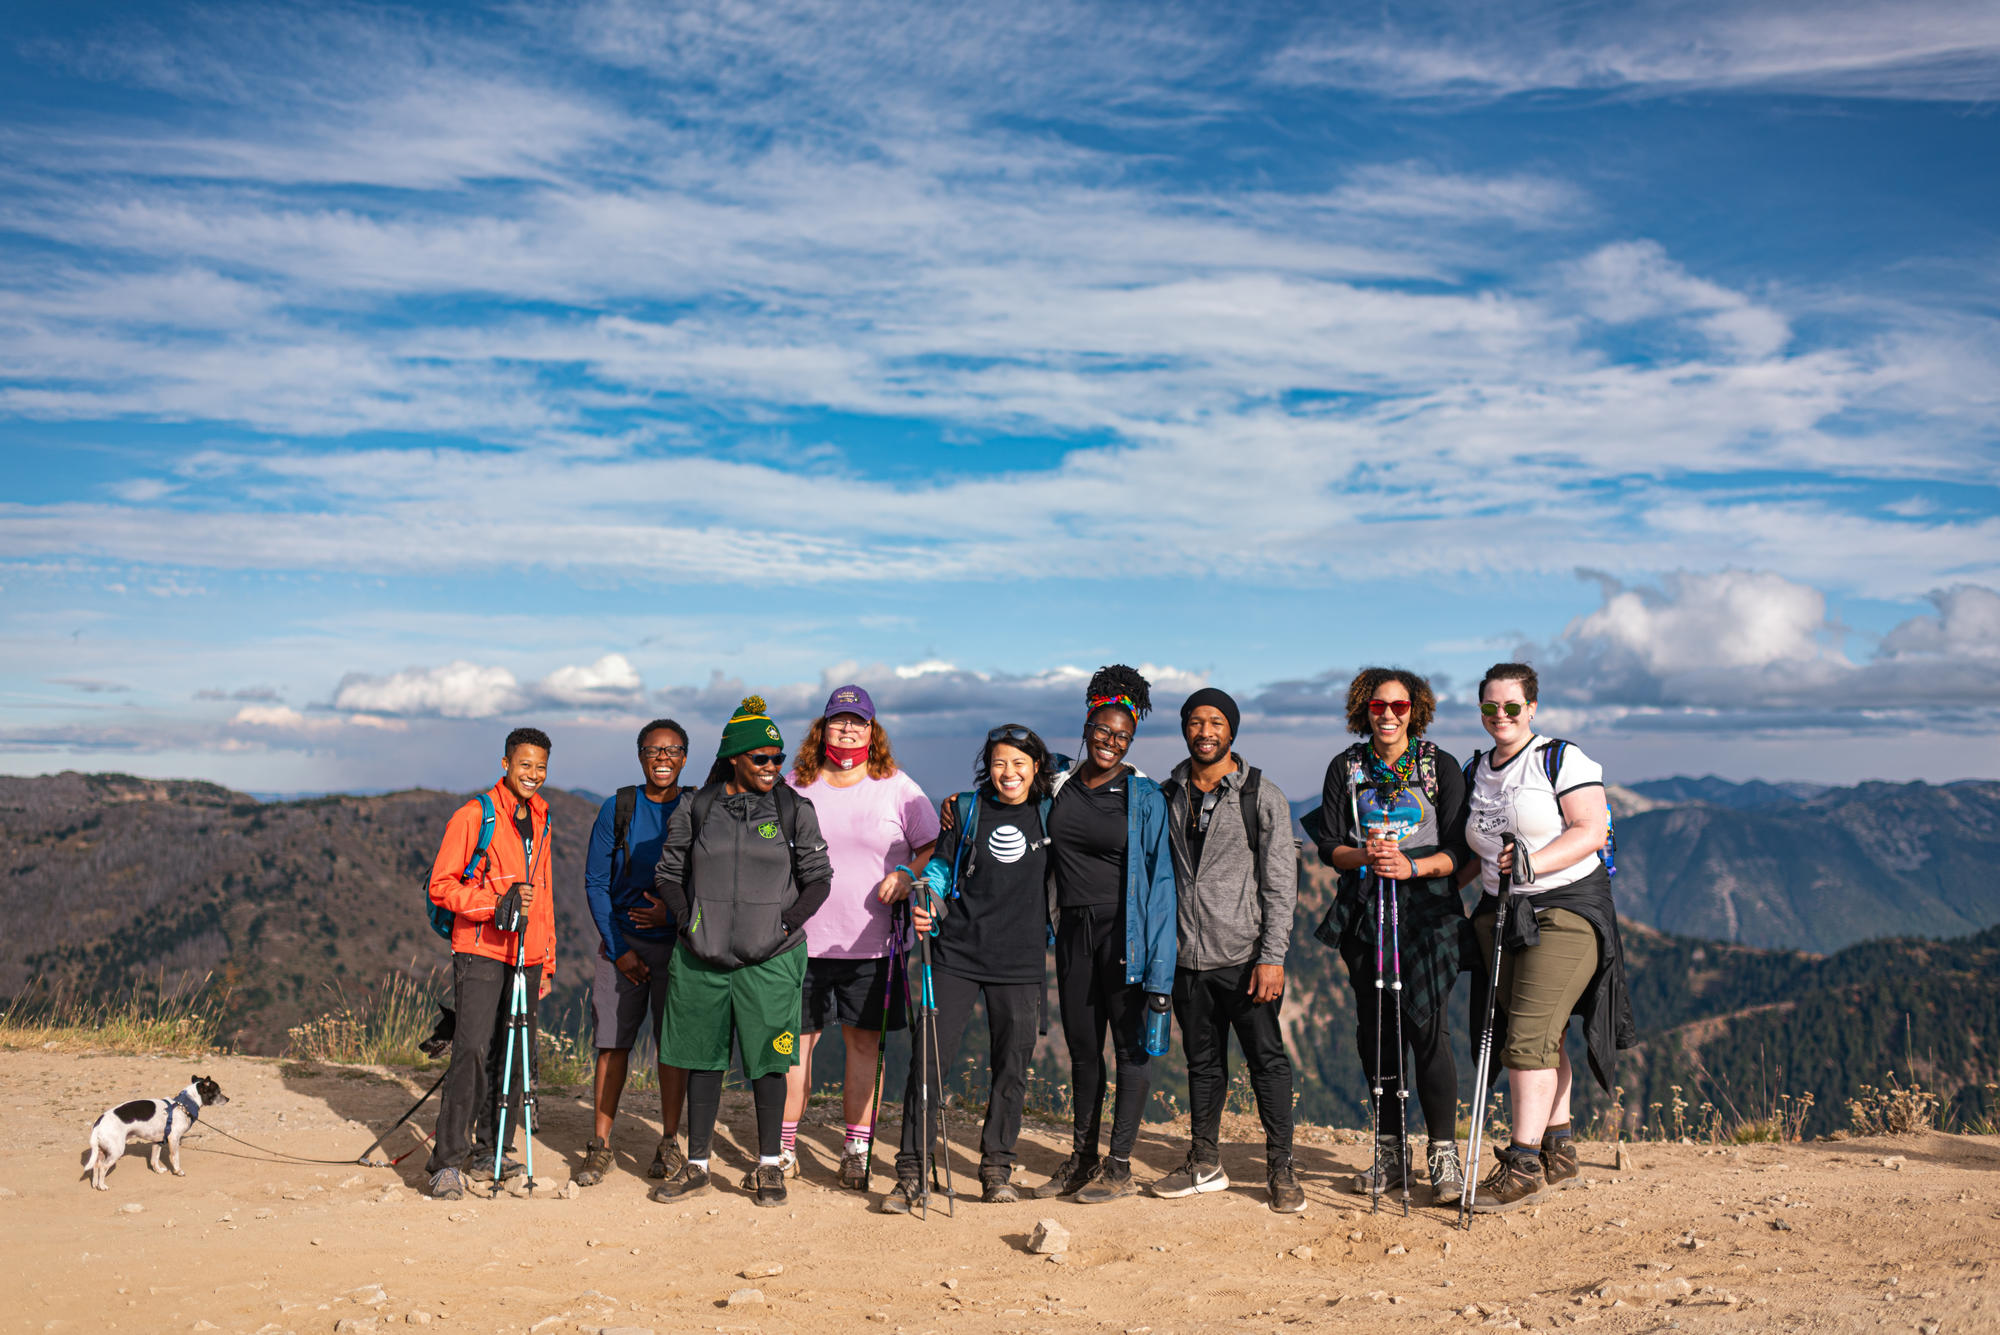 Meet the BIPOC groups working to make the outdoors accessible